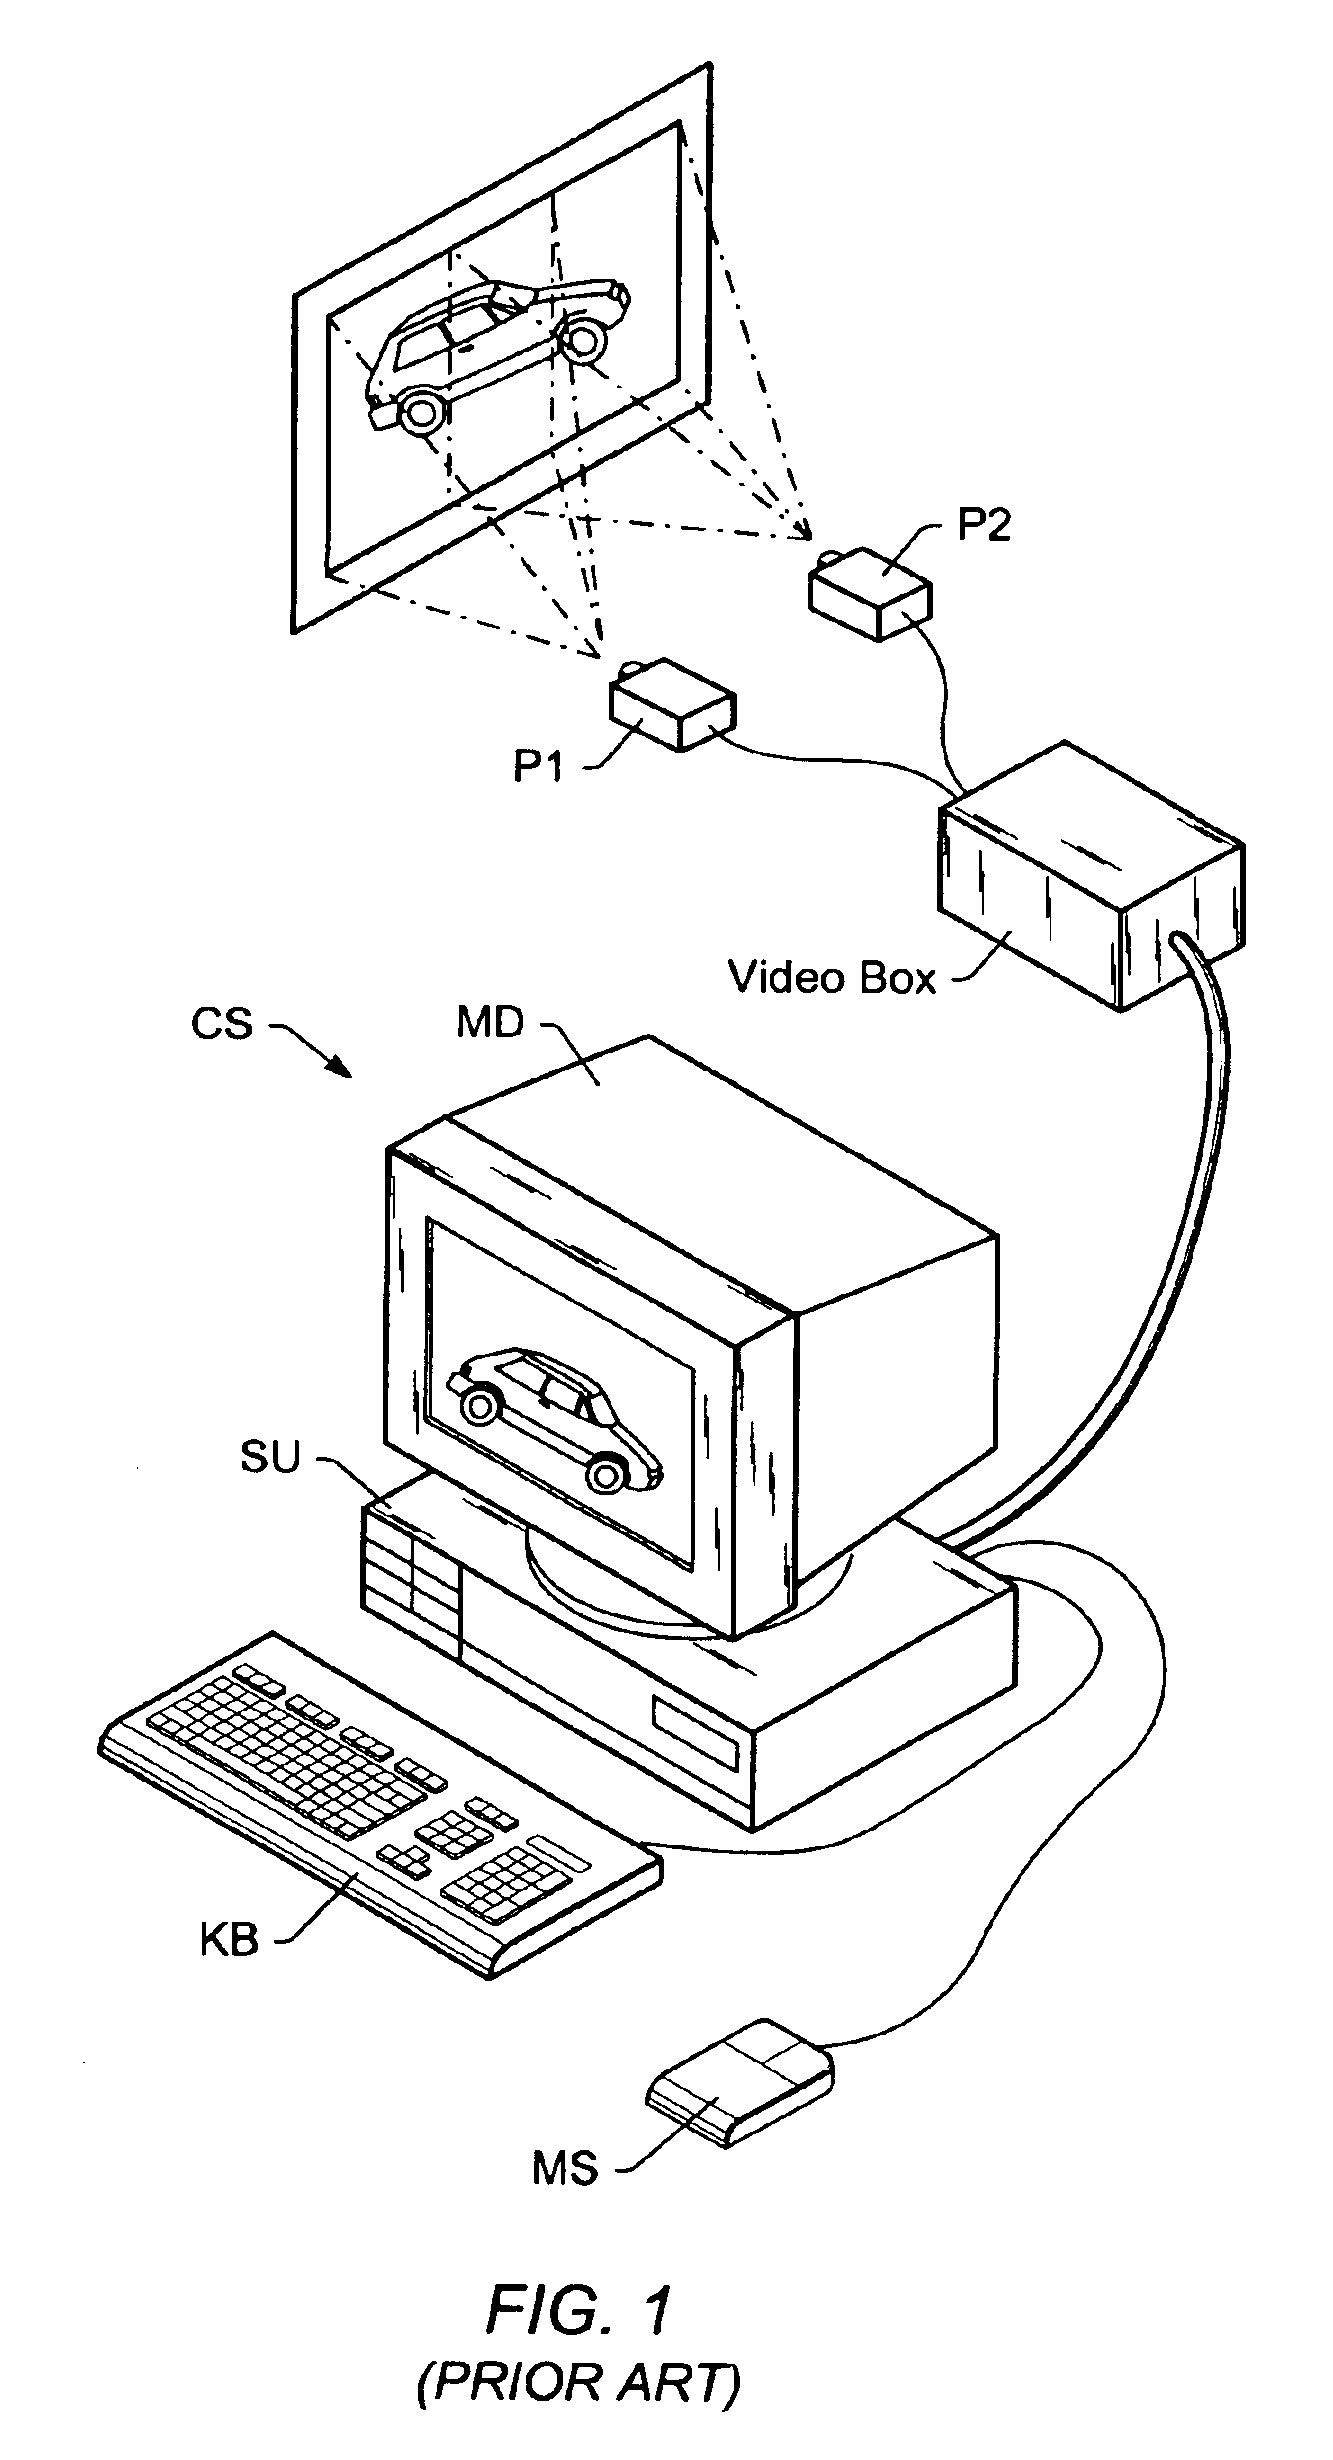 Graphics system configured to perform distortion correction